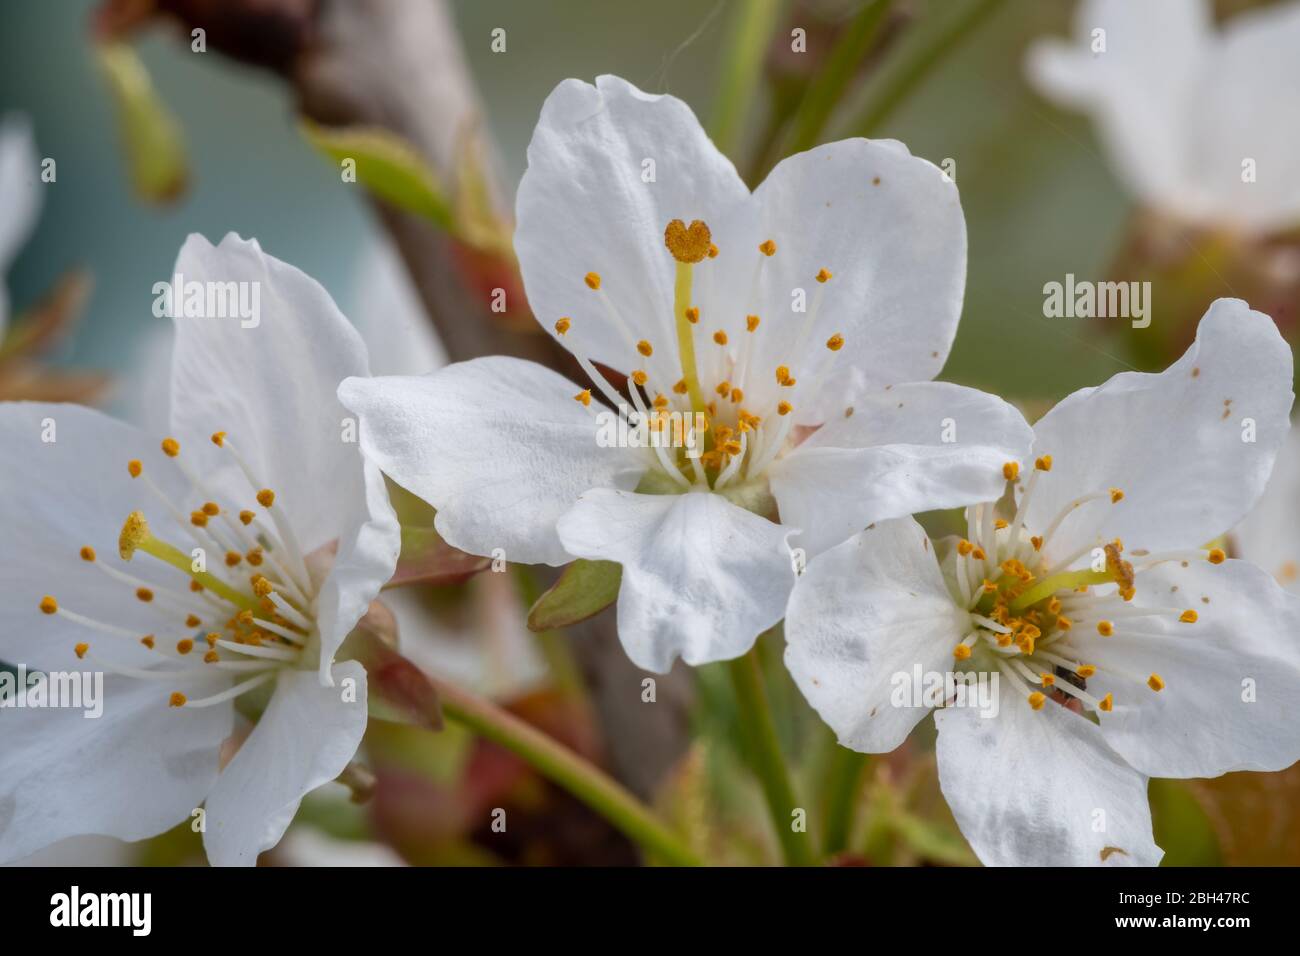 Close up of white cherry blossom in bloom Stock Photo